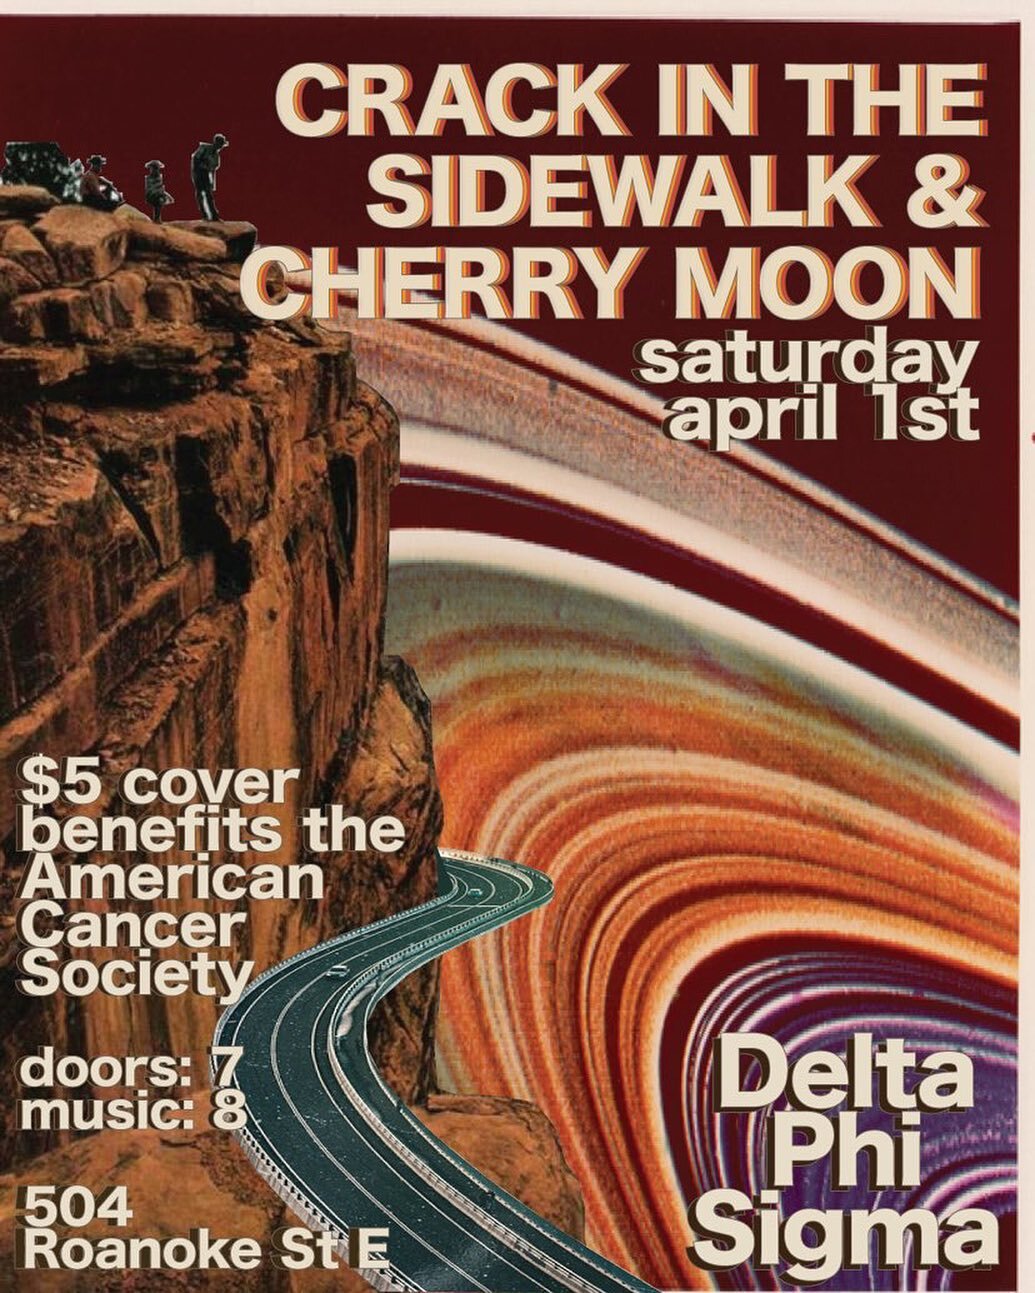 We&rsquo;re gonna be having a show on Saturday featuring the two best bands in Blacksburg, @citsband and @cherrymoondudes will both be performing so come out and support a great cause.